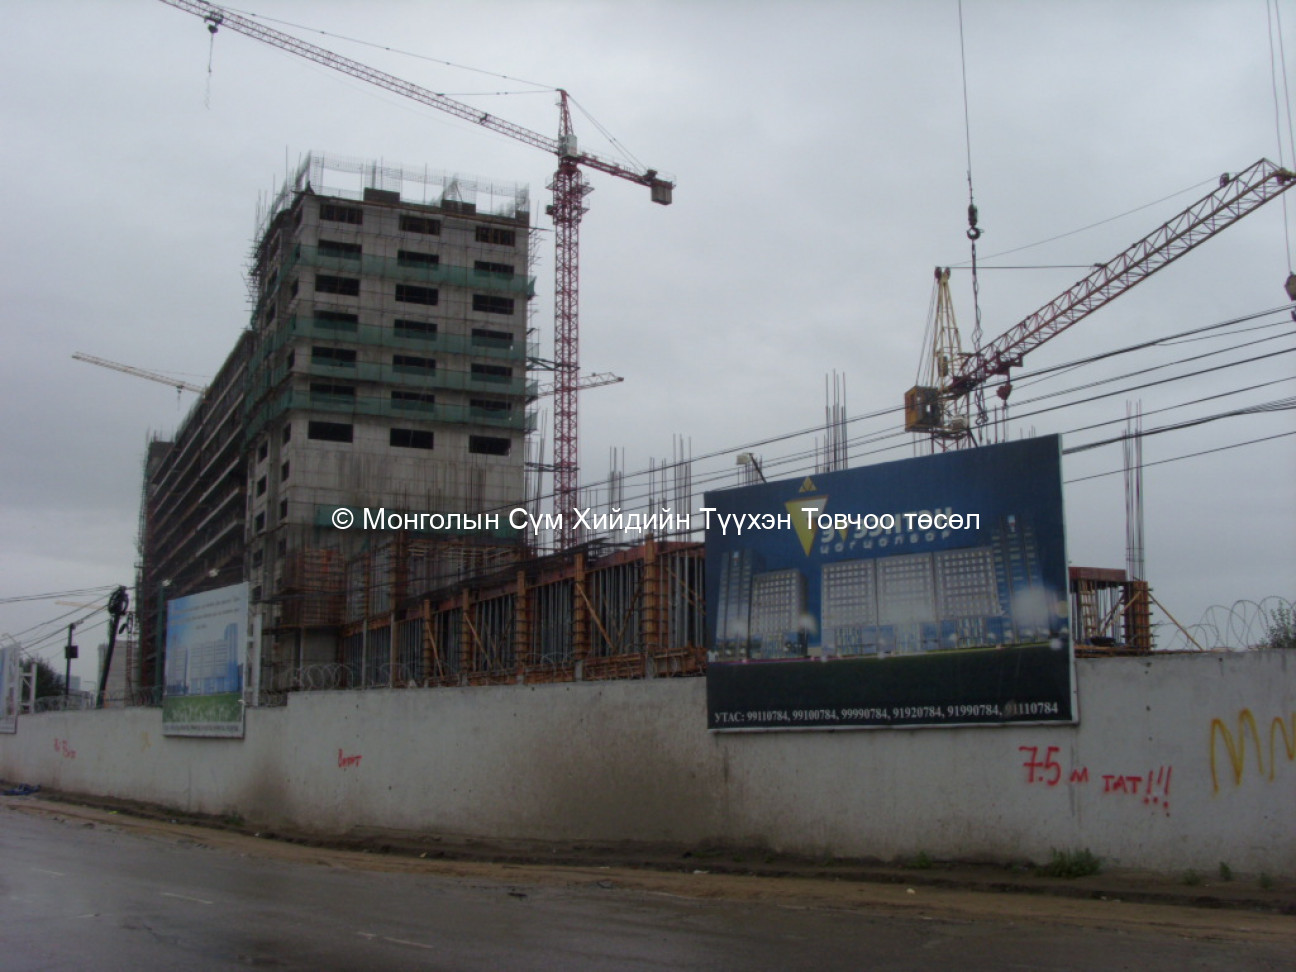 The new comlex being built on the site 2007